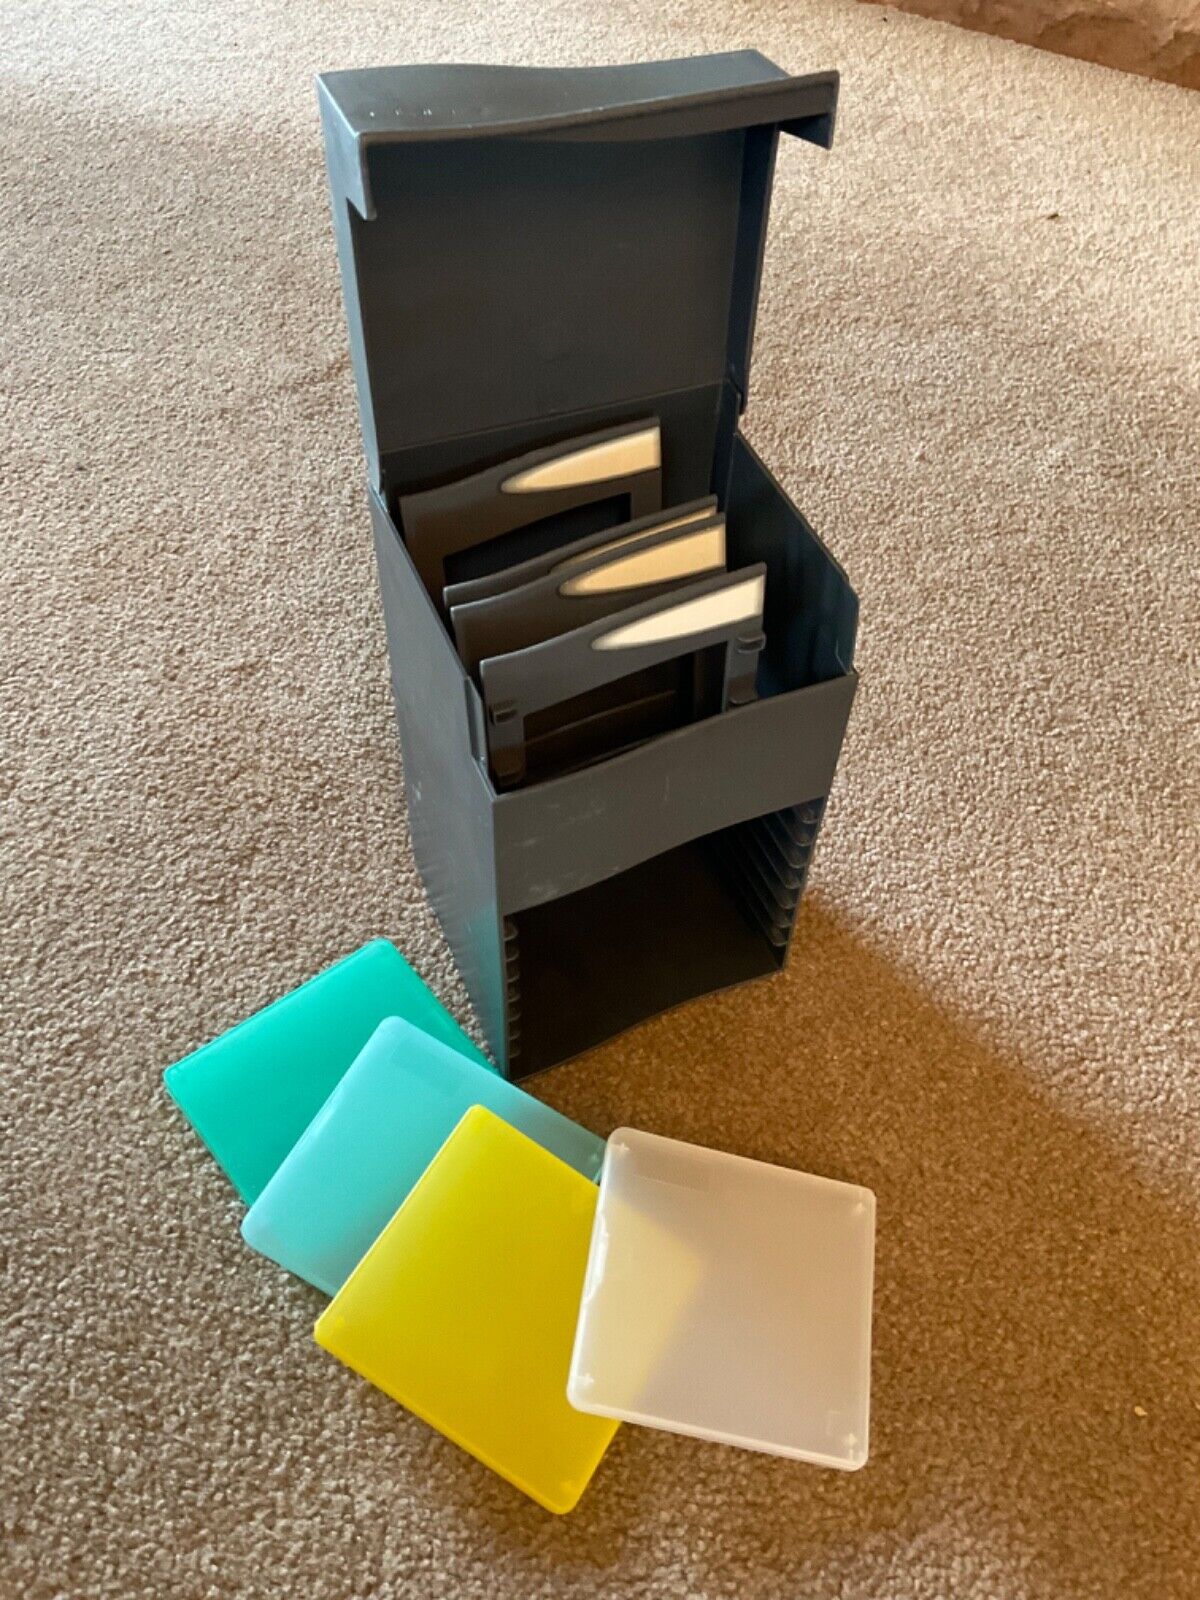 Vintage 3.5 (3 1/2) inch floppy disk and CD storage boxes